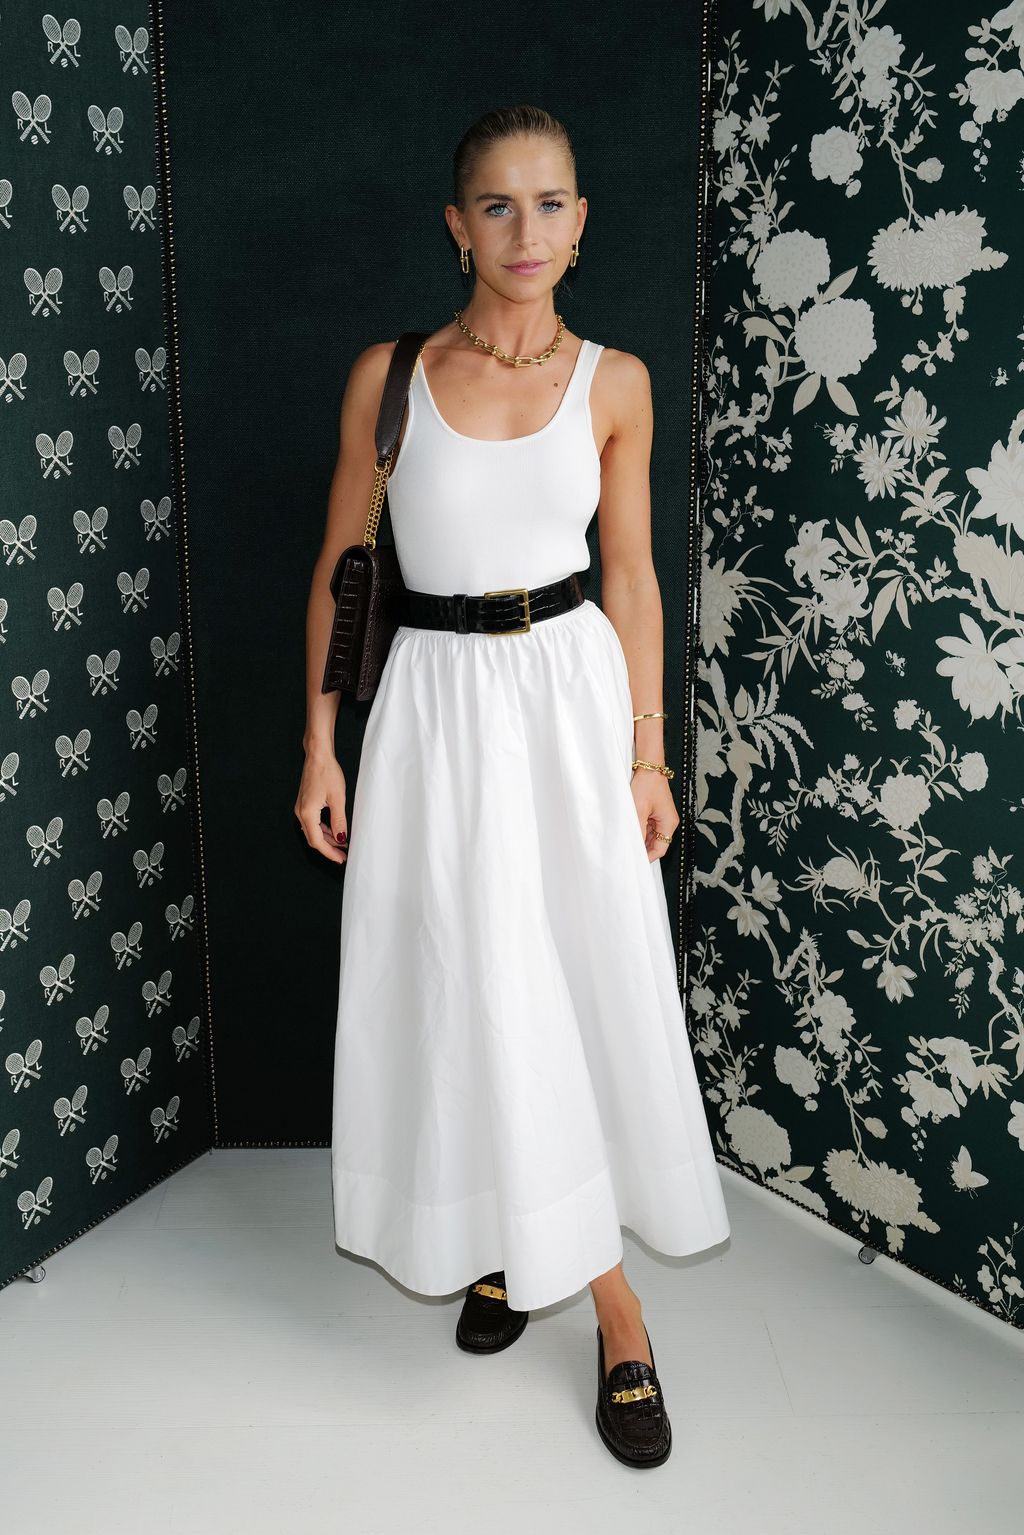 Caroline Daur looked magnificent in monochrome, wearing a white pleated skirt with a vest tucked in, a black wait belt, a black and gold shoulder bag and penny loafers.